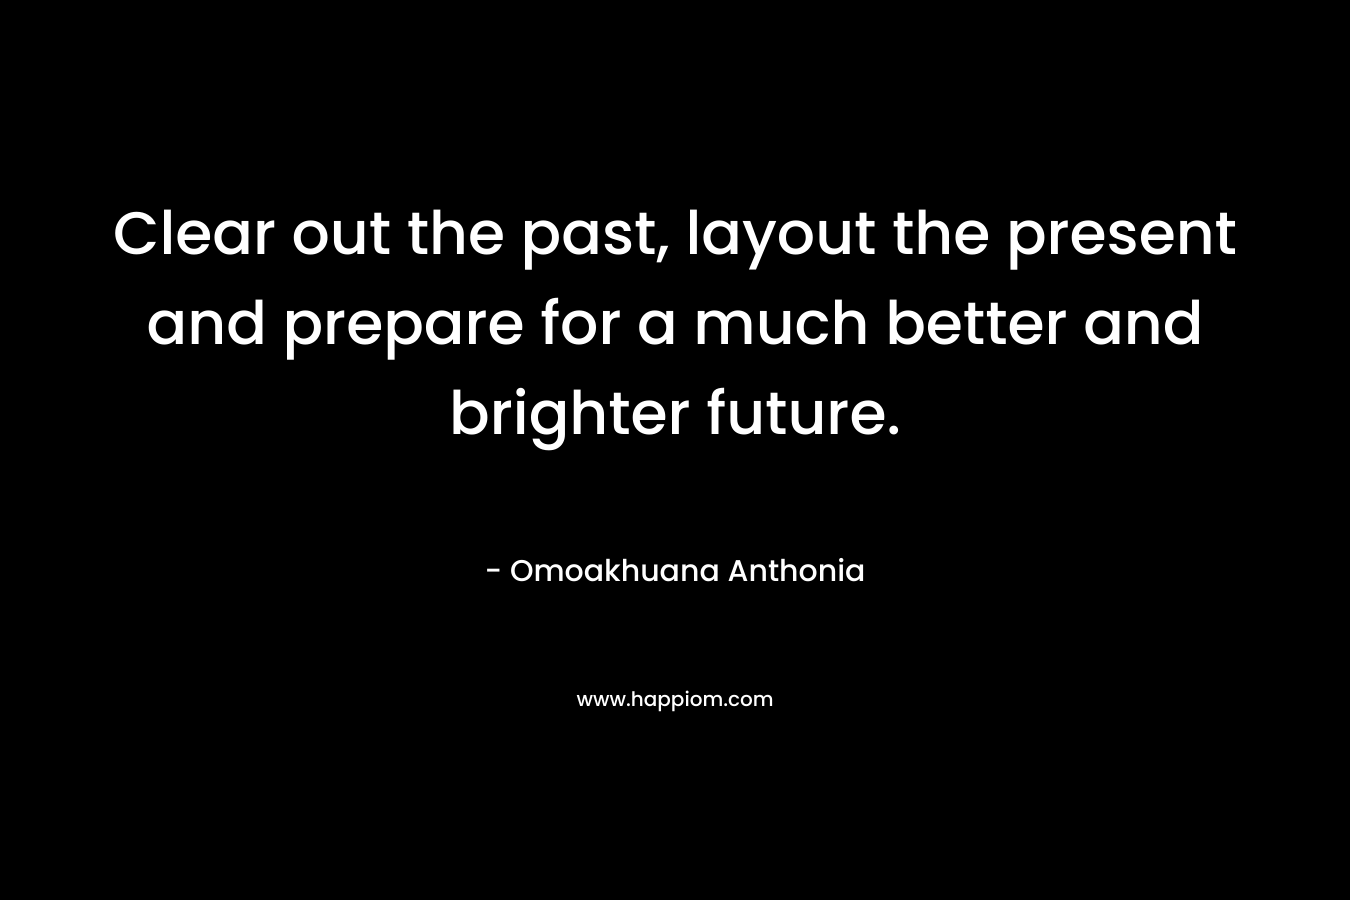 Clear out the past, layout the present and prepare for a much better and brighter future. – Omoakhuana Anthonia